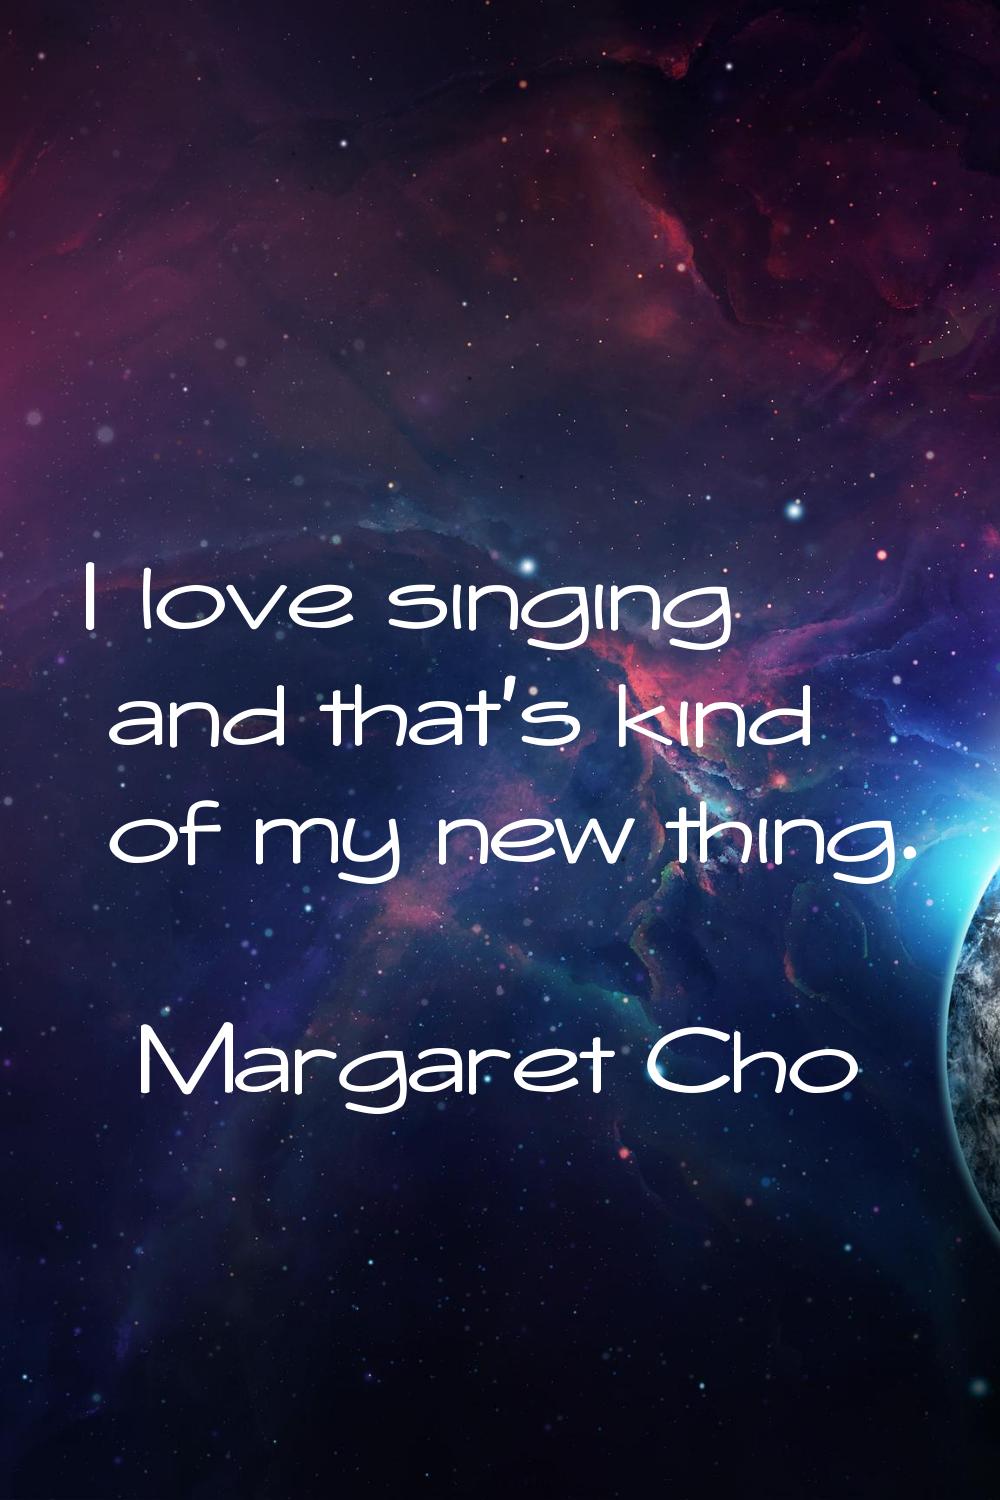 I love singing and that's kind of my new thing.